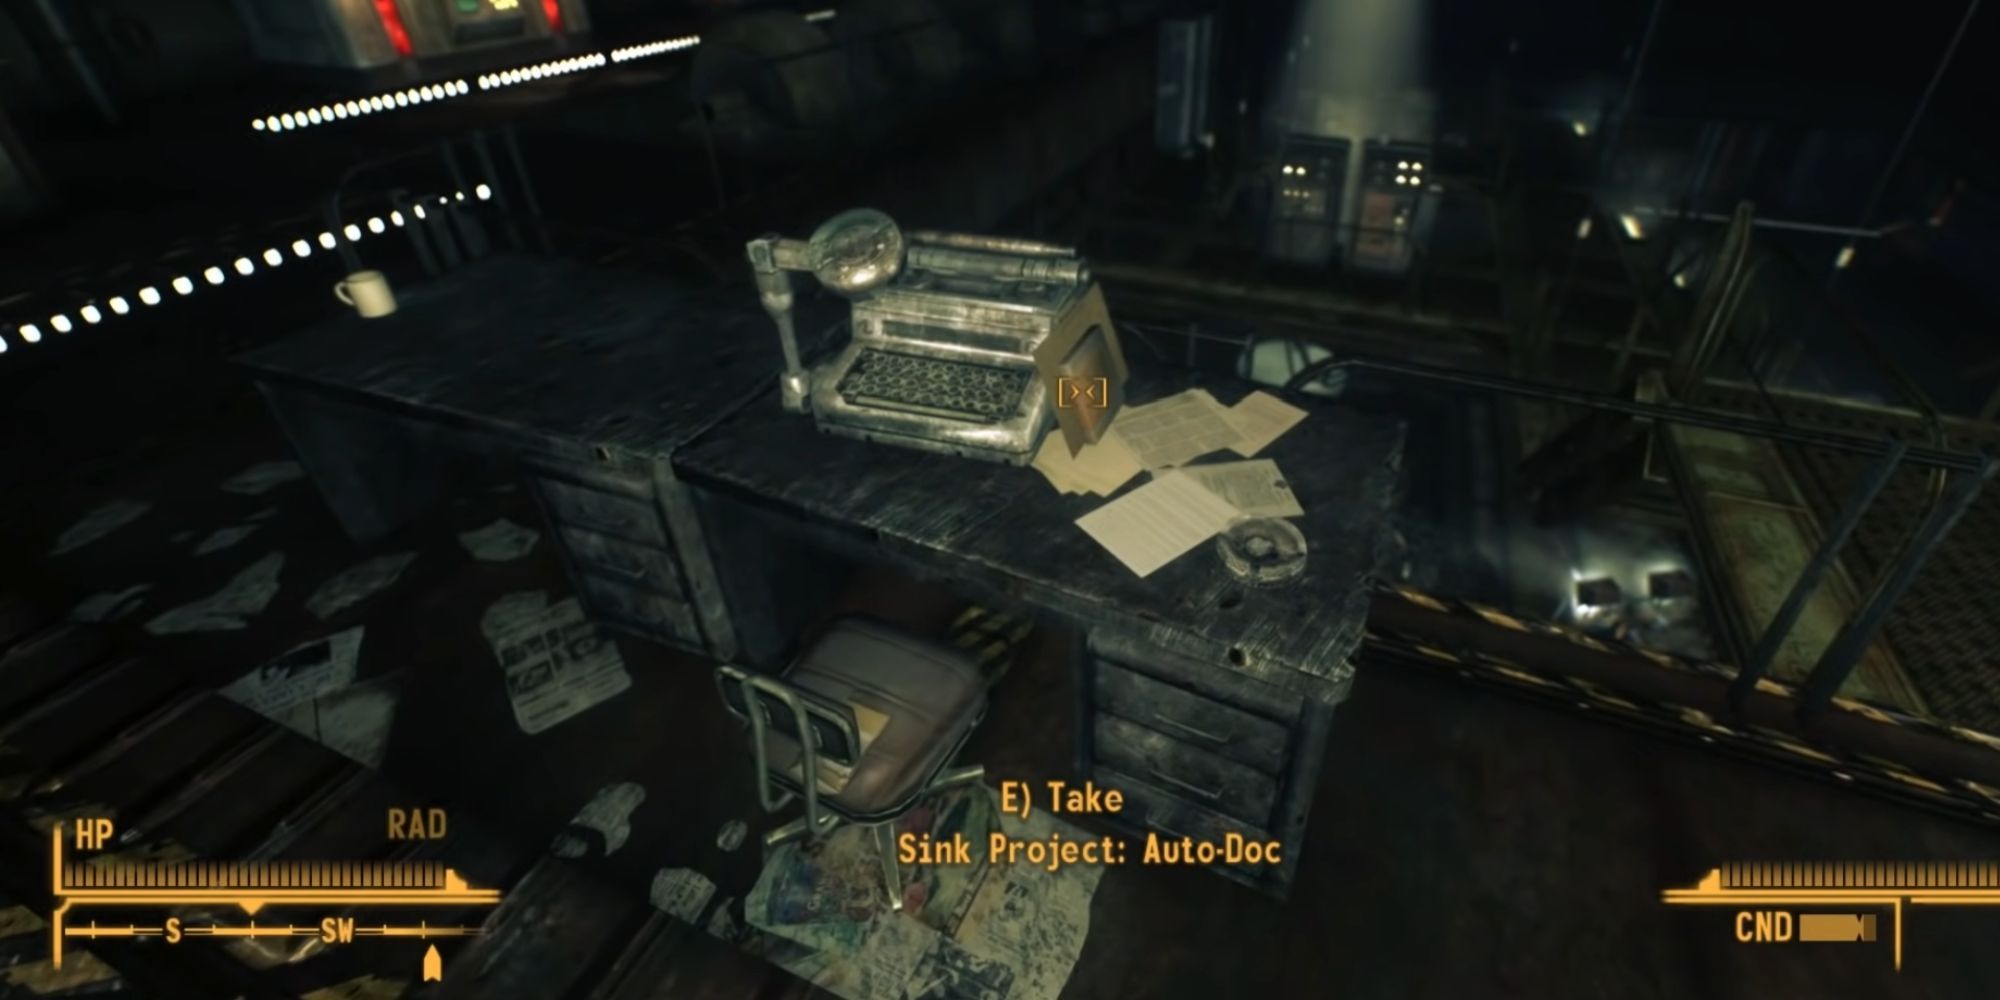 Fallout New Vegas Sink Project Auto-Doc On A Desk